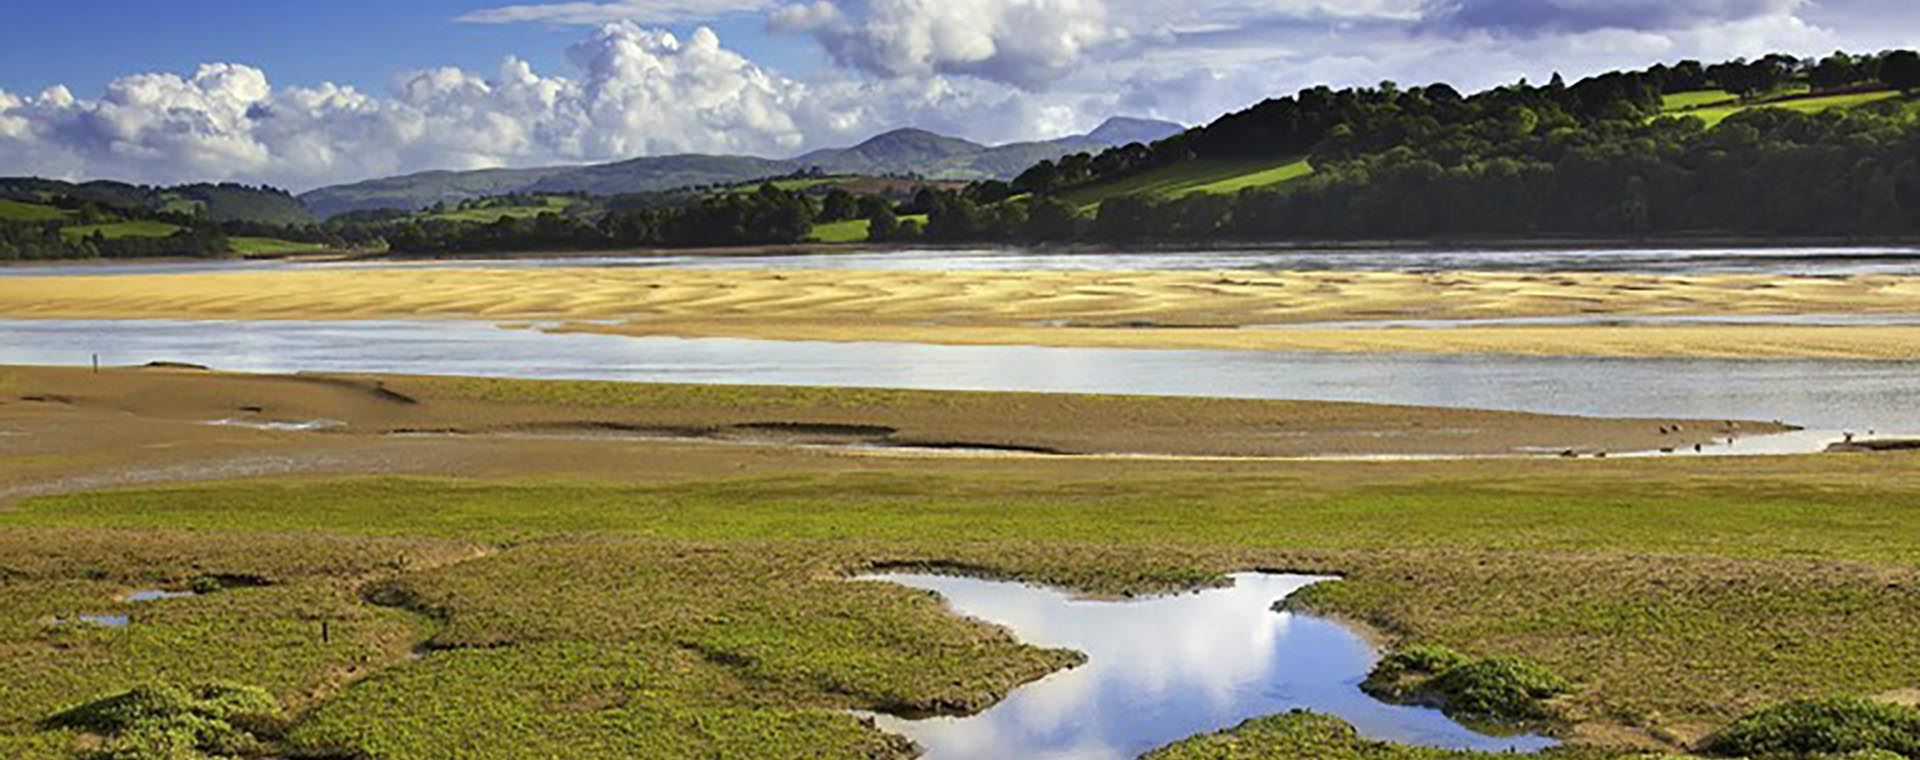 RSPB Conwy near South Stack Lighthouse